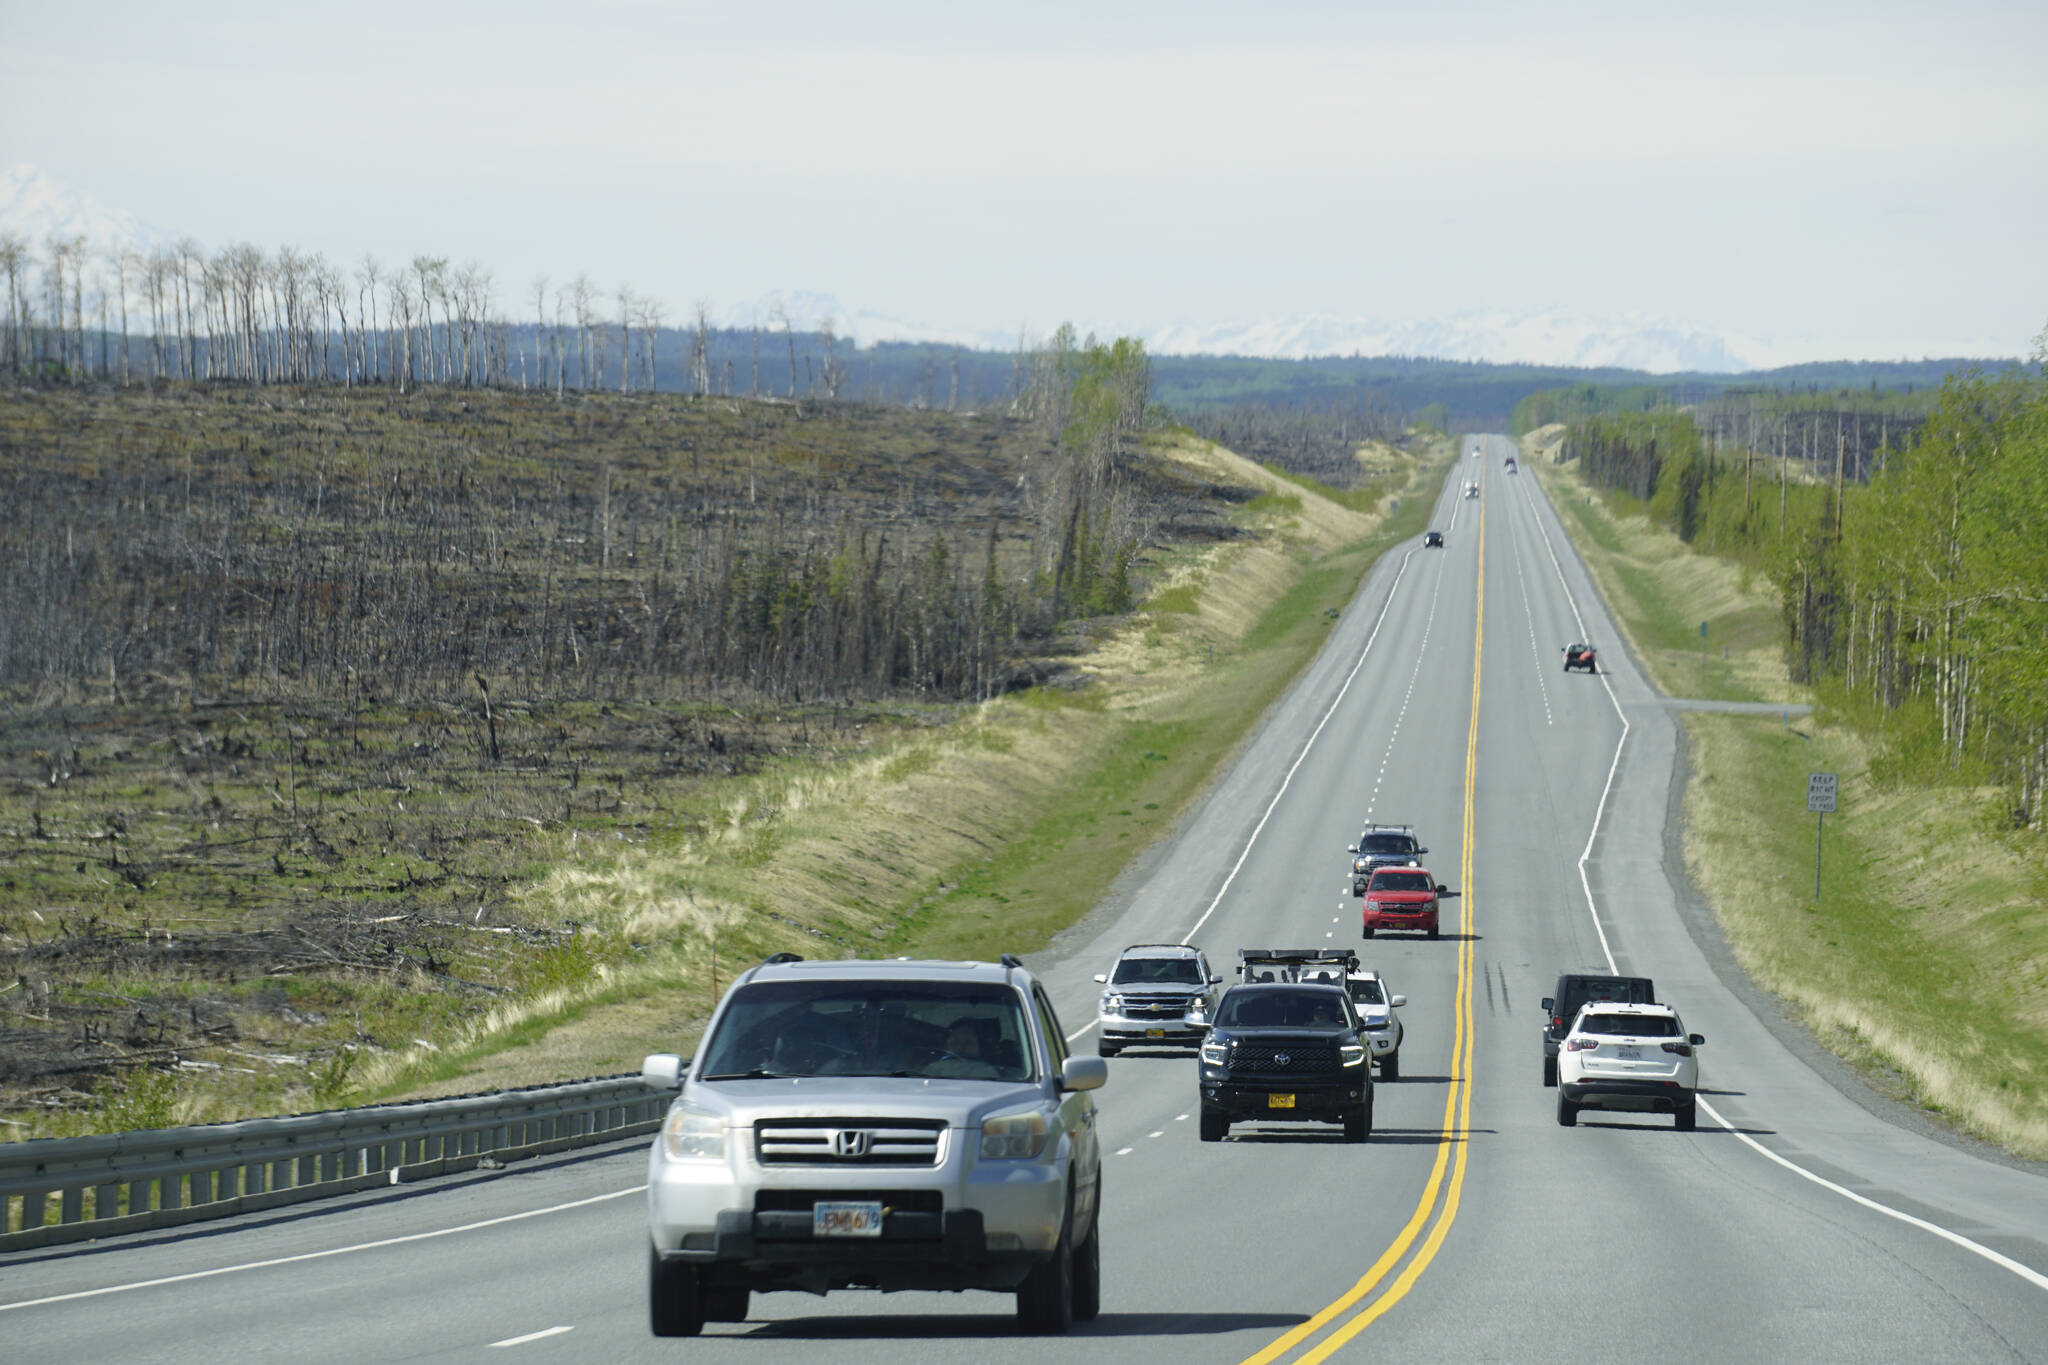 After driving through the Kenai Mountains from Turnagain Pass past Cooper Landing, the Sterling Highway opens up here in the Kenai National Wildlife Refuge going through the Swan Lake fire burn, as seen on Sunday, May 22, 2022. (Photo by Michael Armstrong/Homer News)